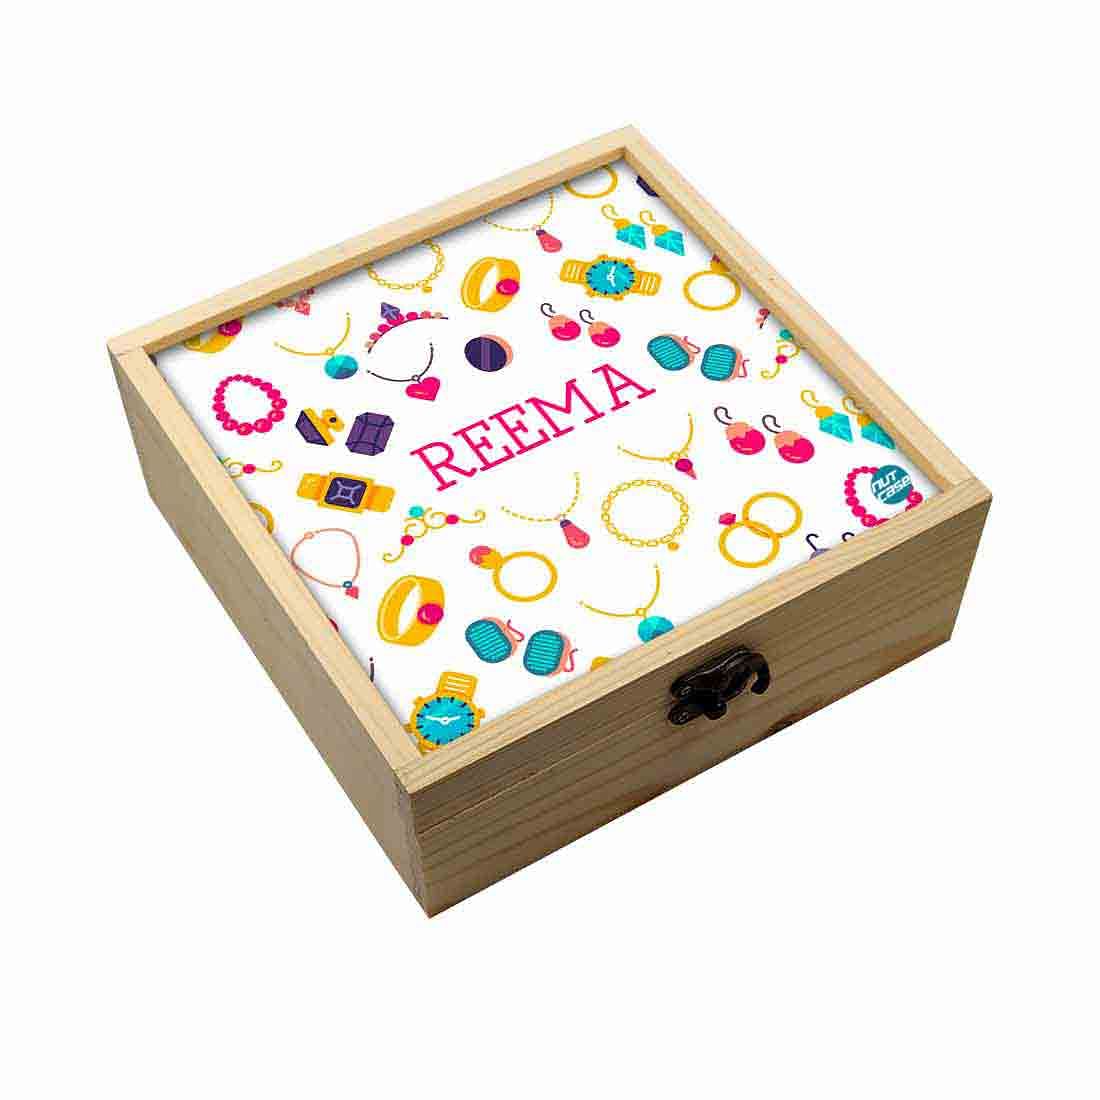 Personalized Girly Jewellery Box -  Golden Ring Necklace Nutcase